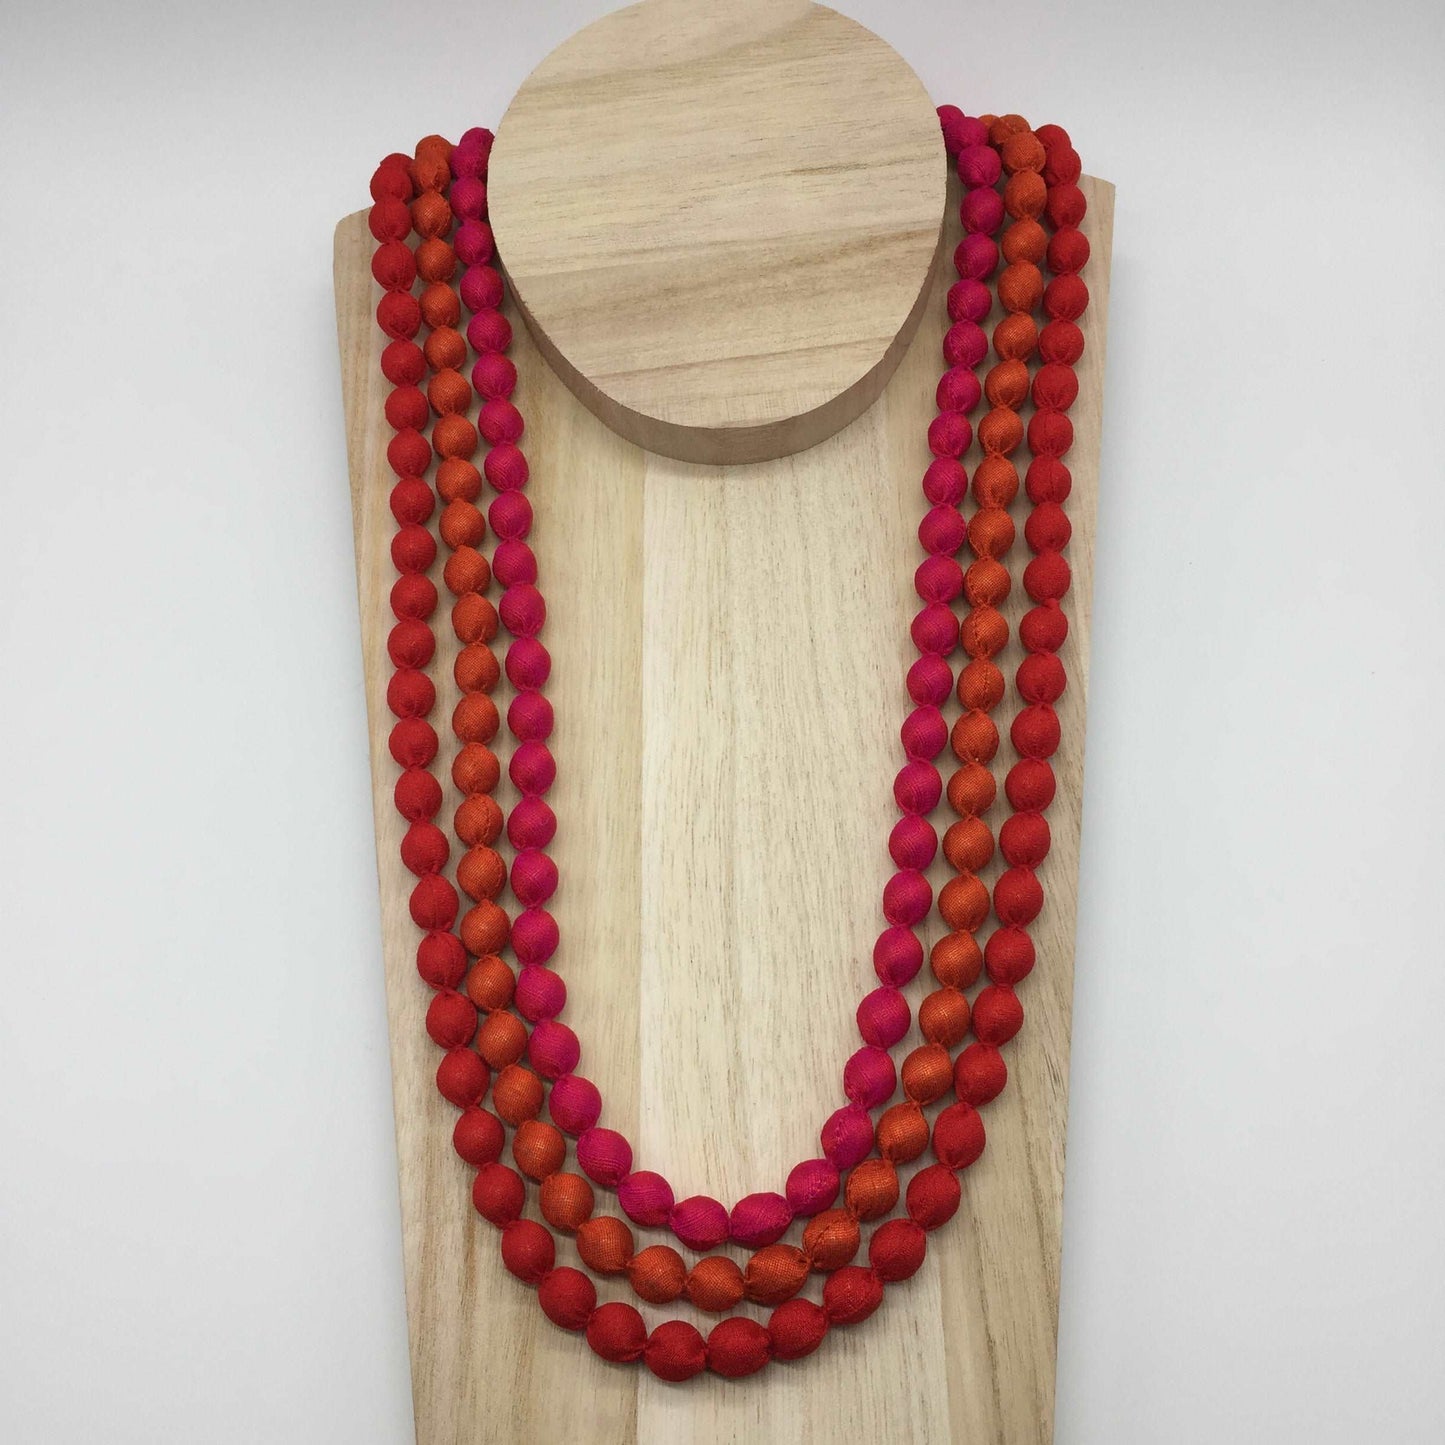 Natural Beauties Multistrand Strand Cascading Bead Necklace Haily 32"